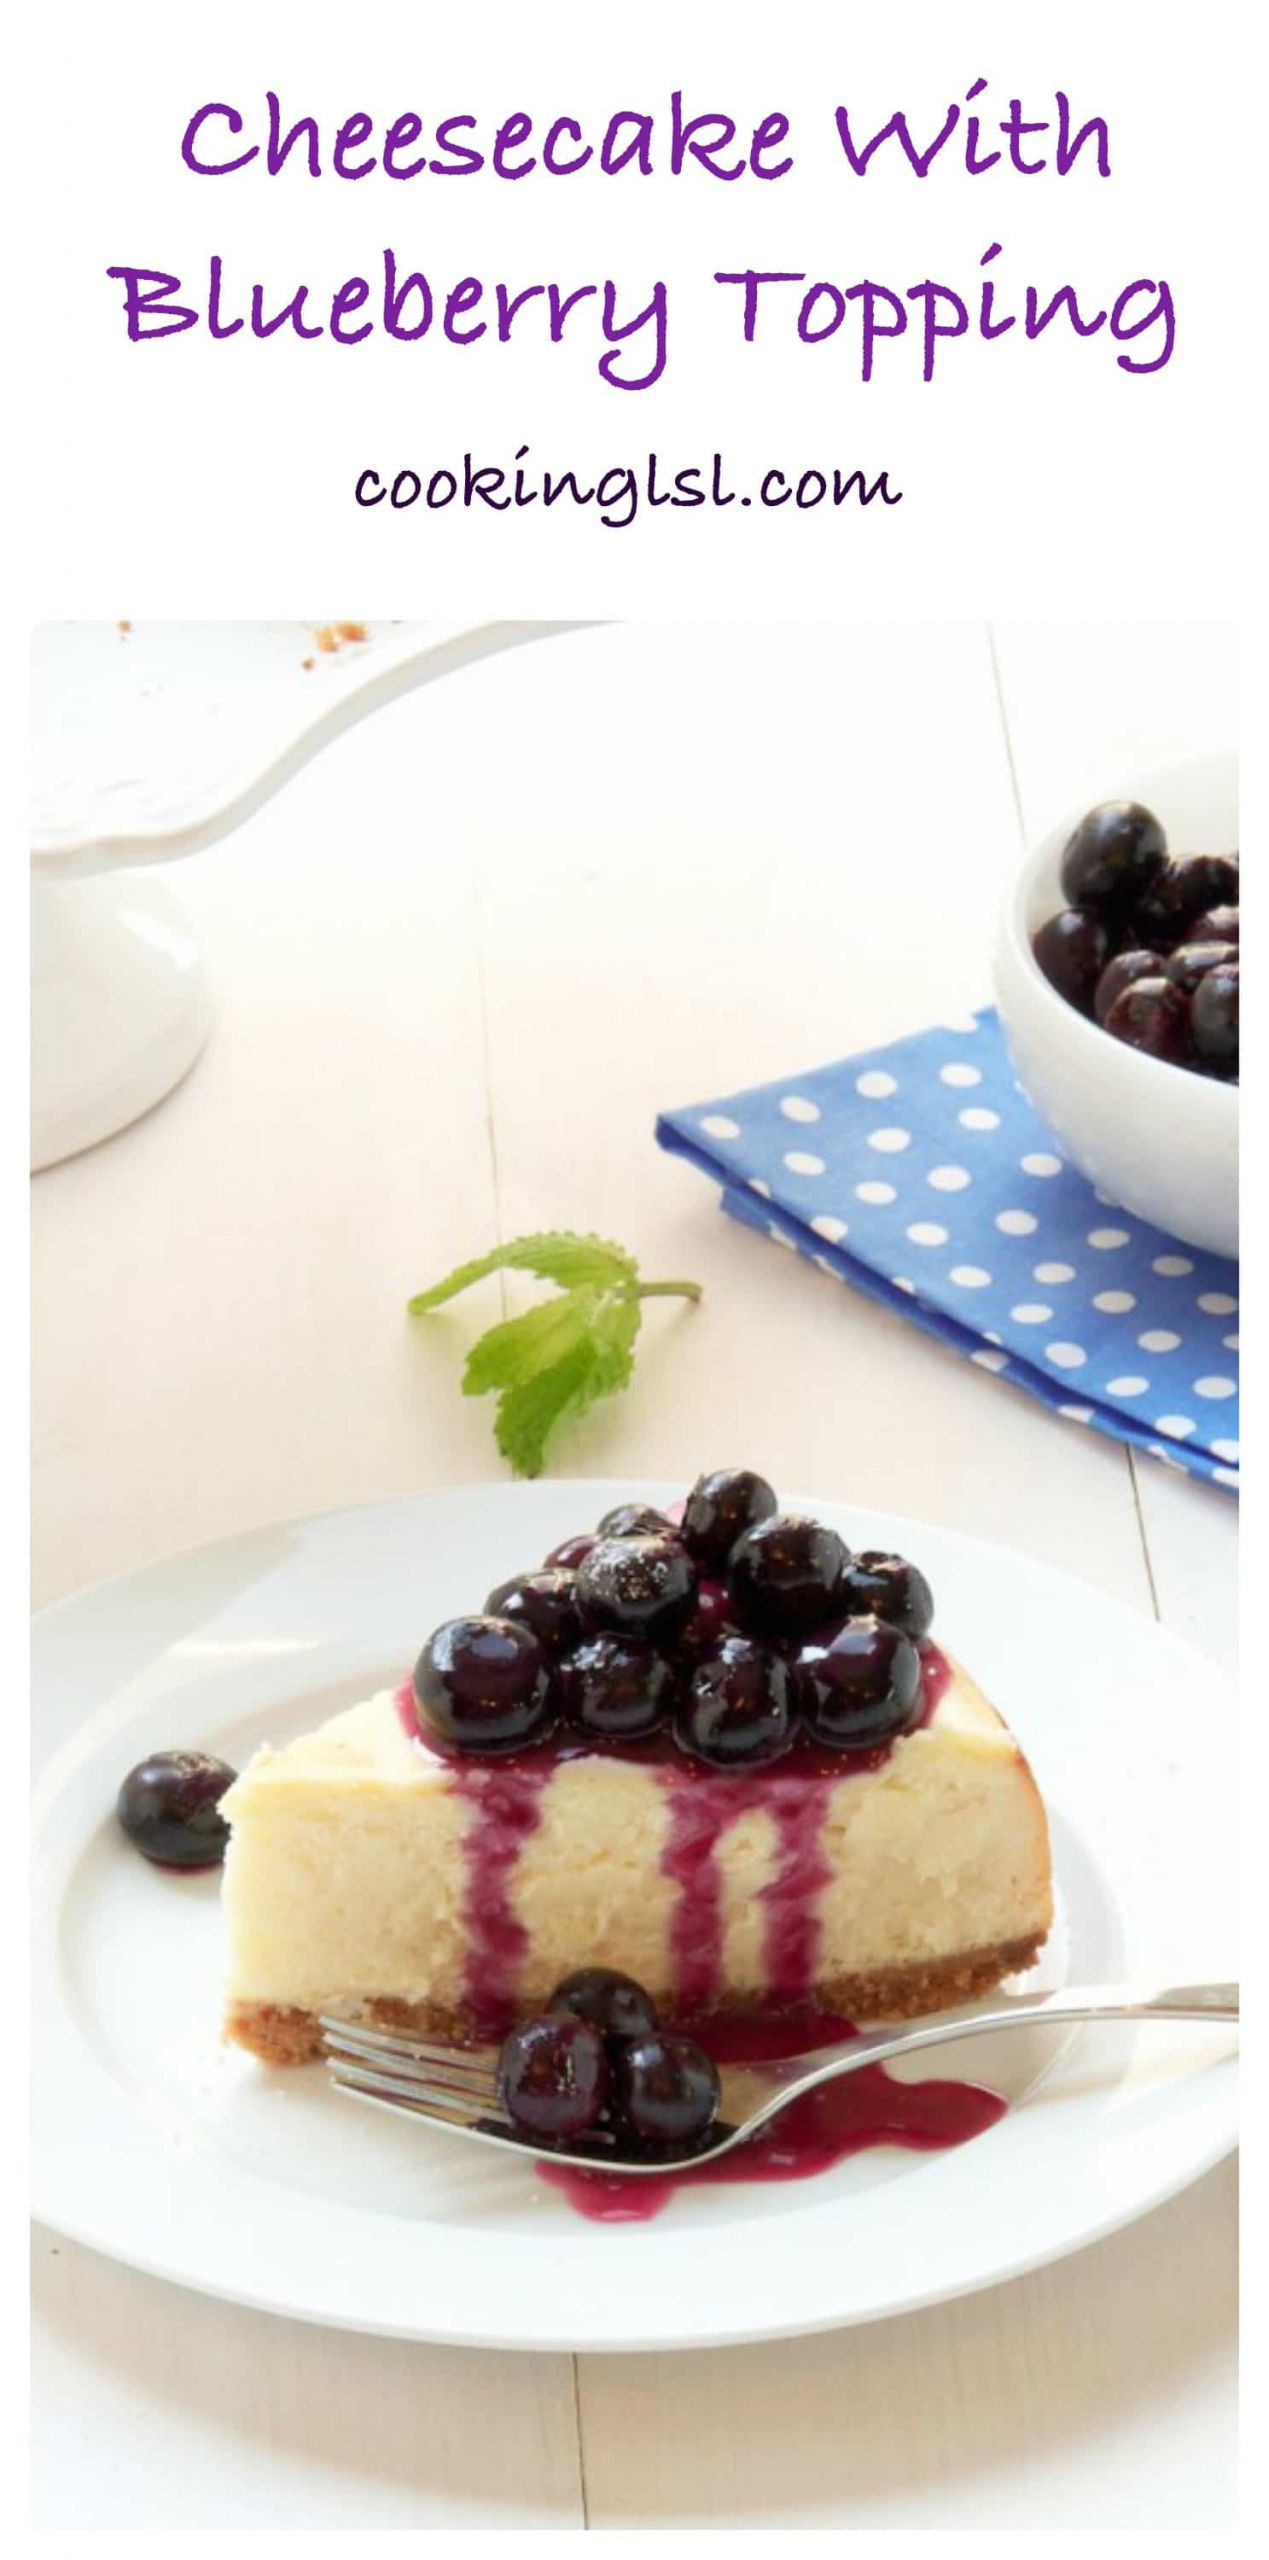 Blueberry Topping For Cheesecake Recipe
 Triple Chocolate Cheesecake Recipe